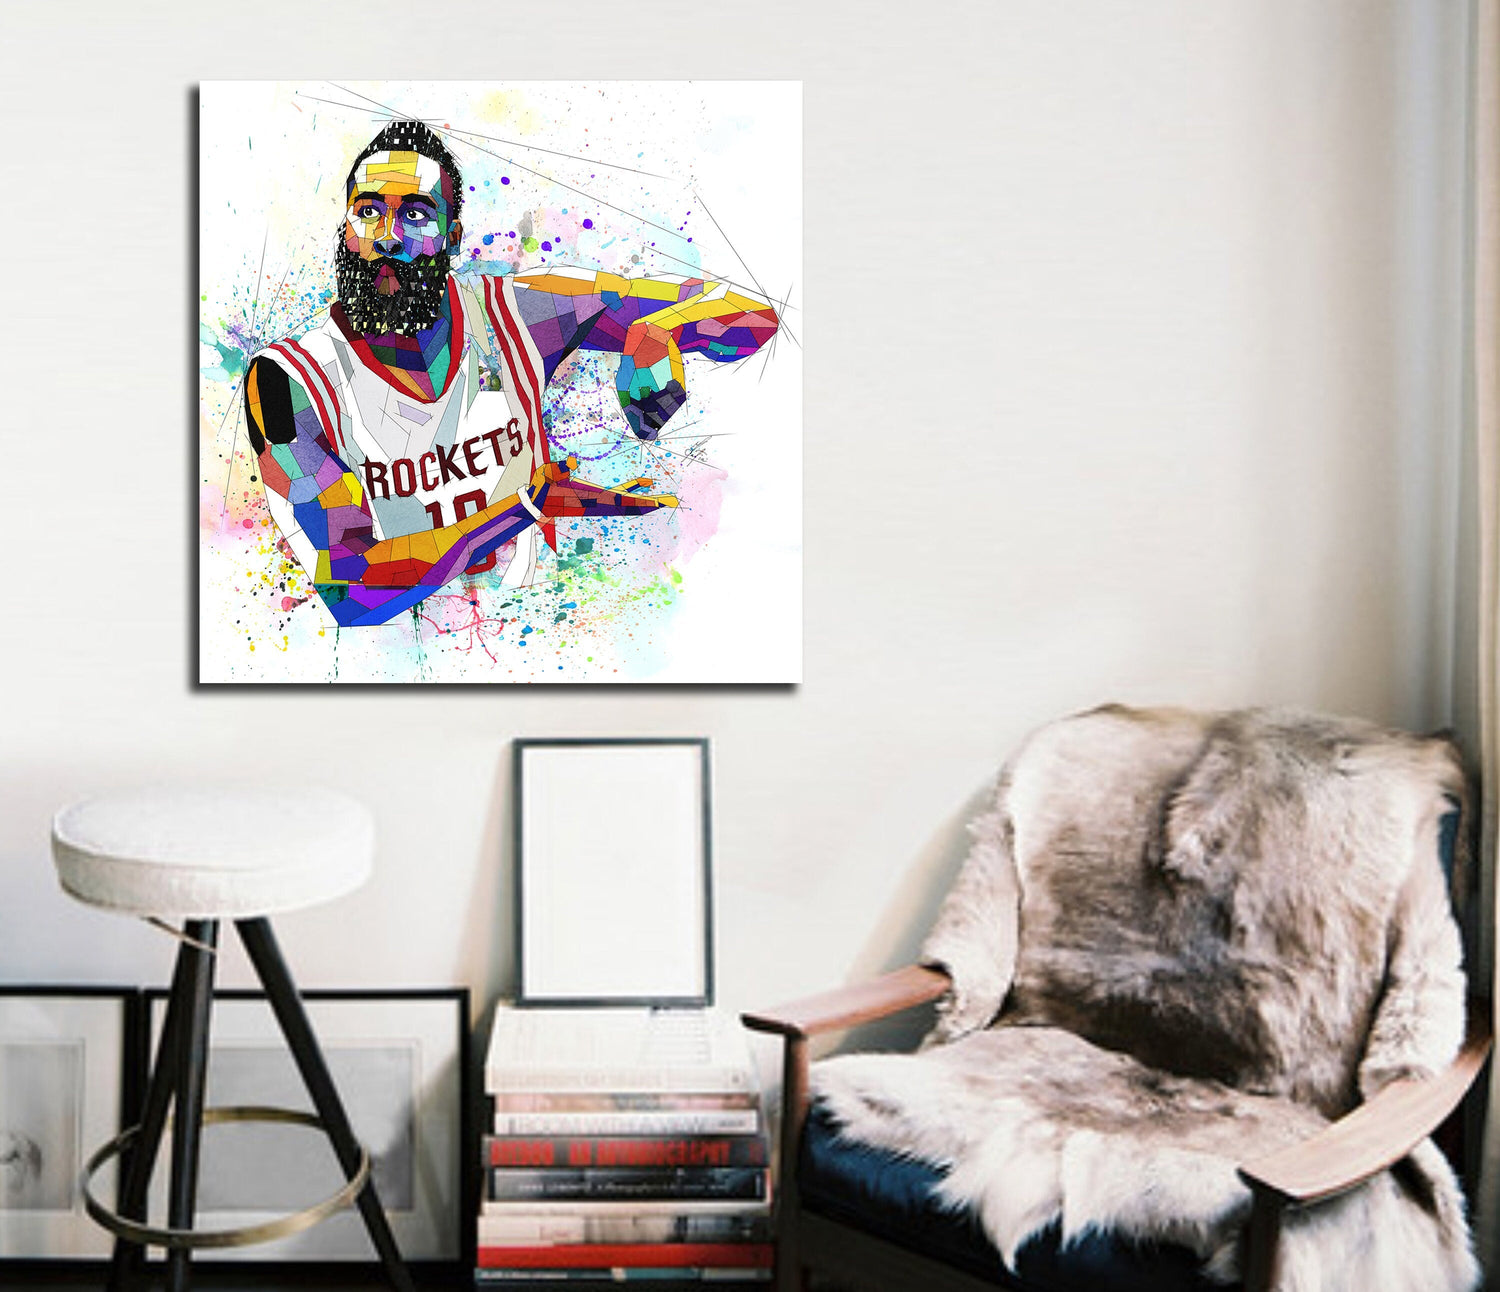 STAINA Basketball Player Poster James Harden Cover Picture (11) Canvas Wall  Art Prints Poster Gifts Photo Picture Painting Posters Room Decor Home